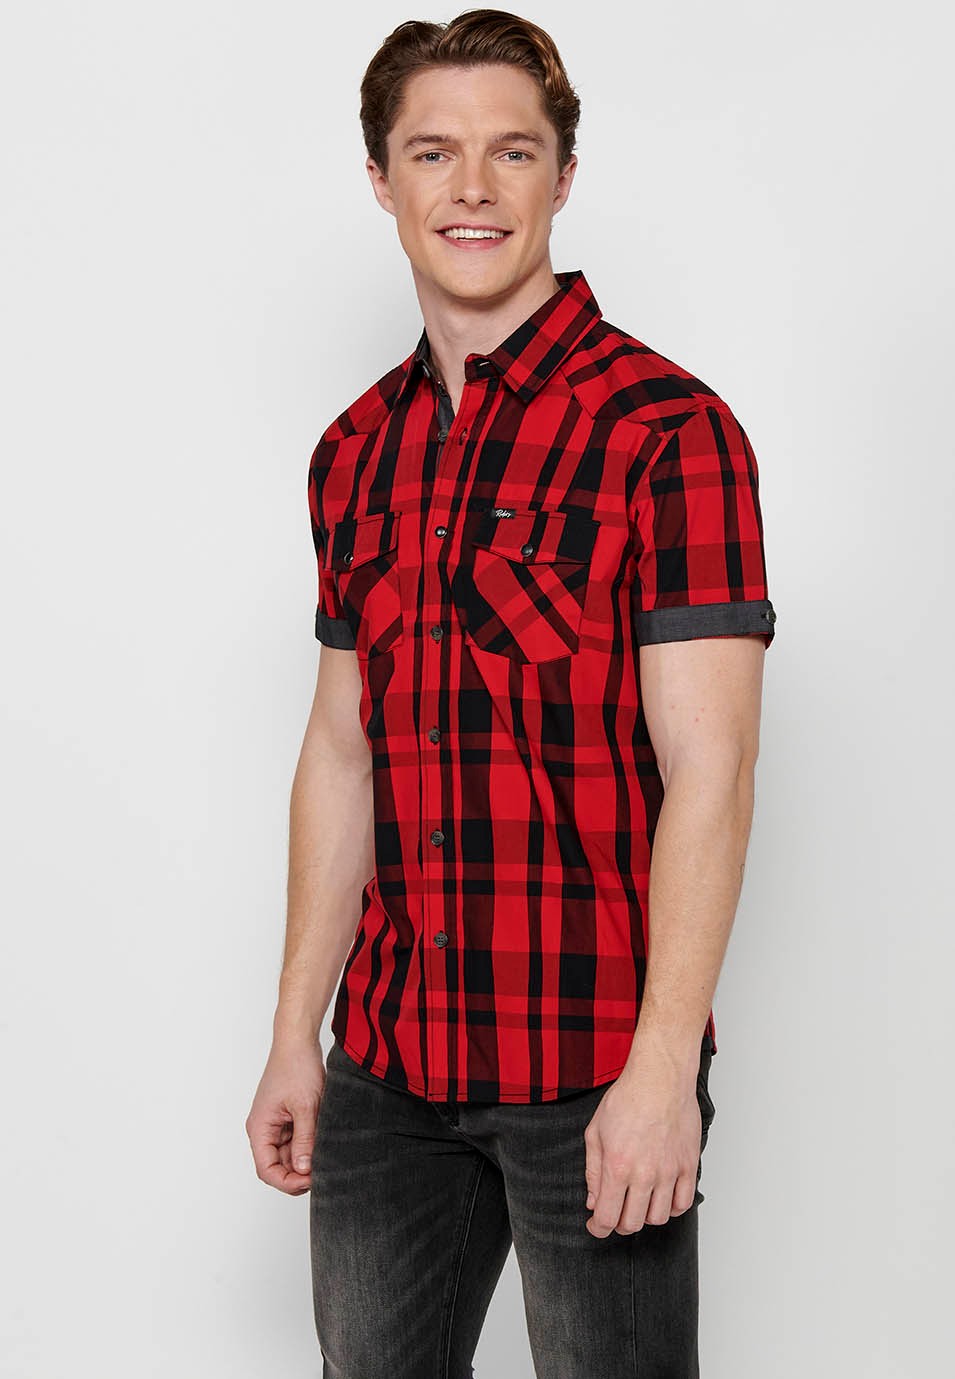 Short sleeve checked shirt, red and black color for men